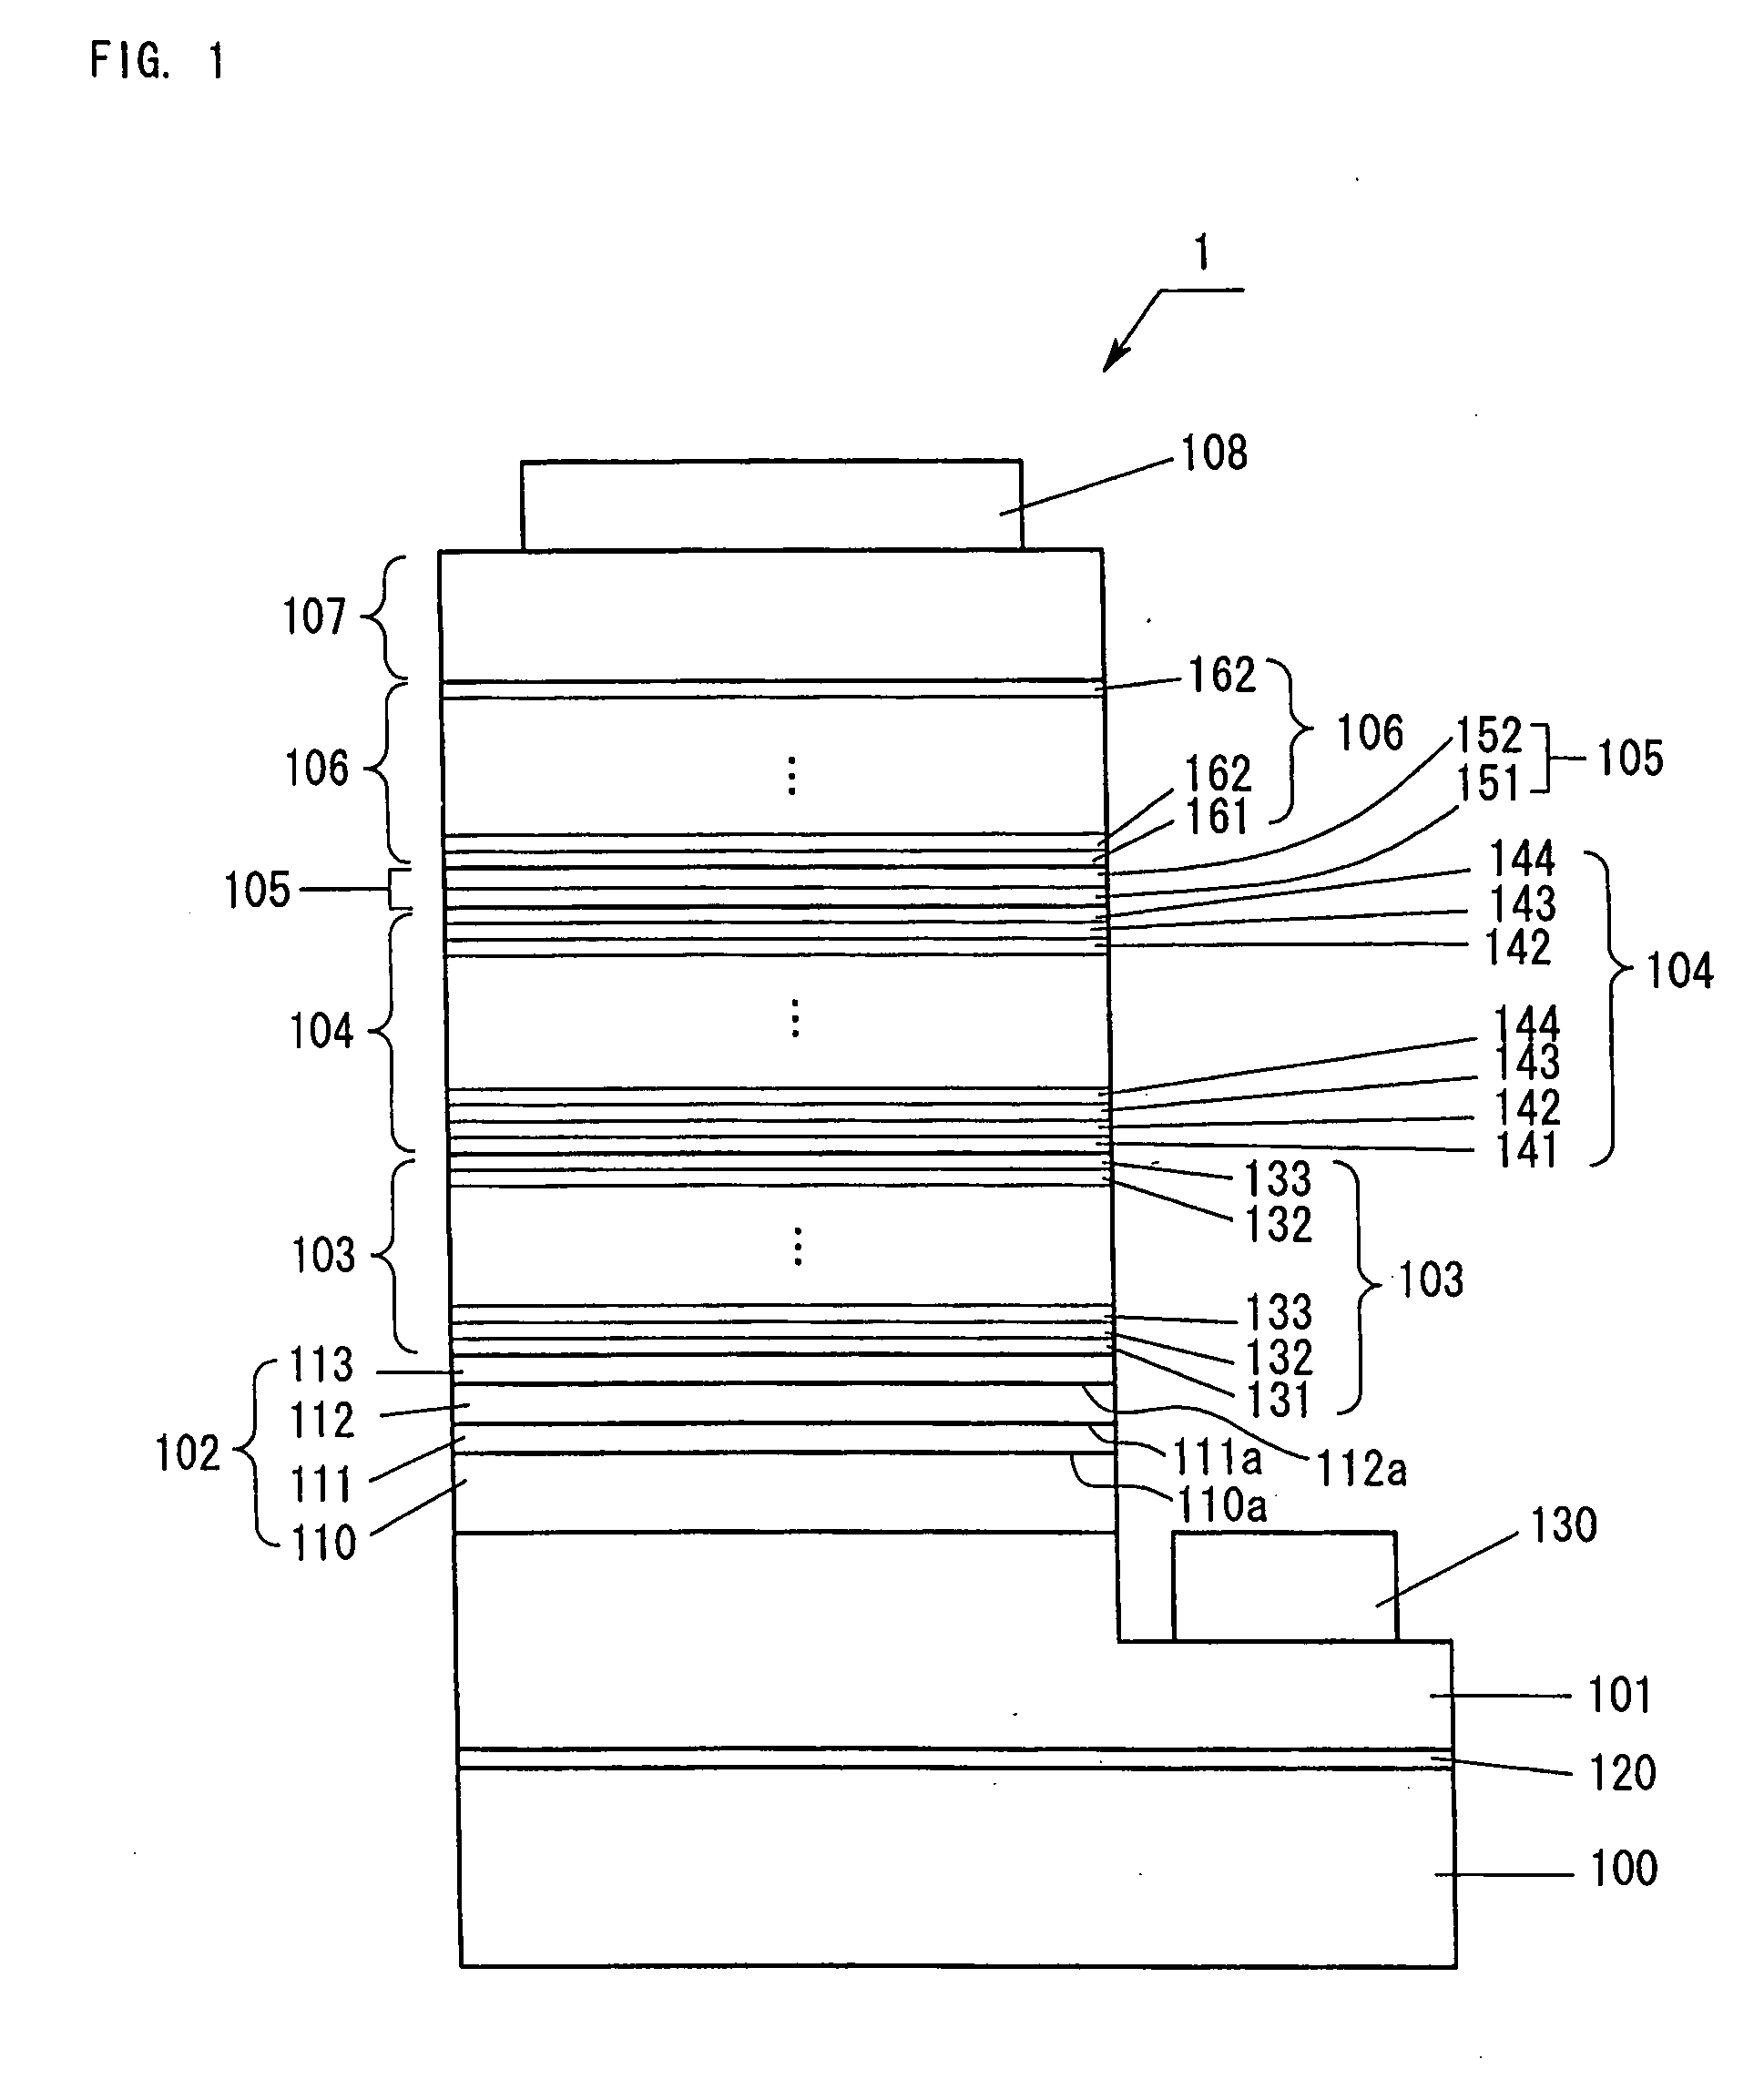 Group lll nitride semiconductor light-emitting device